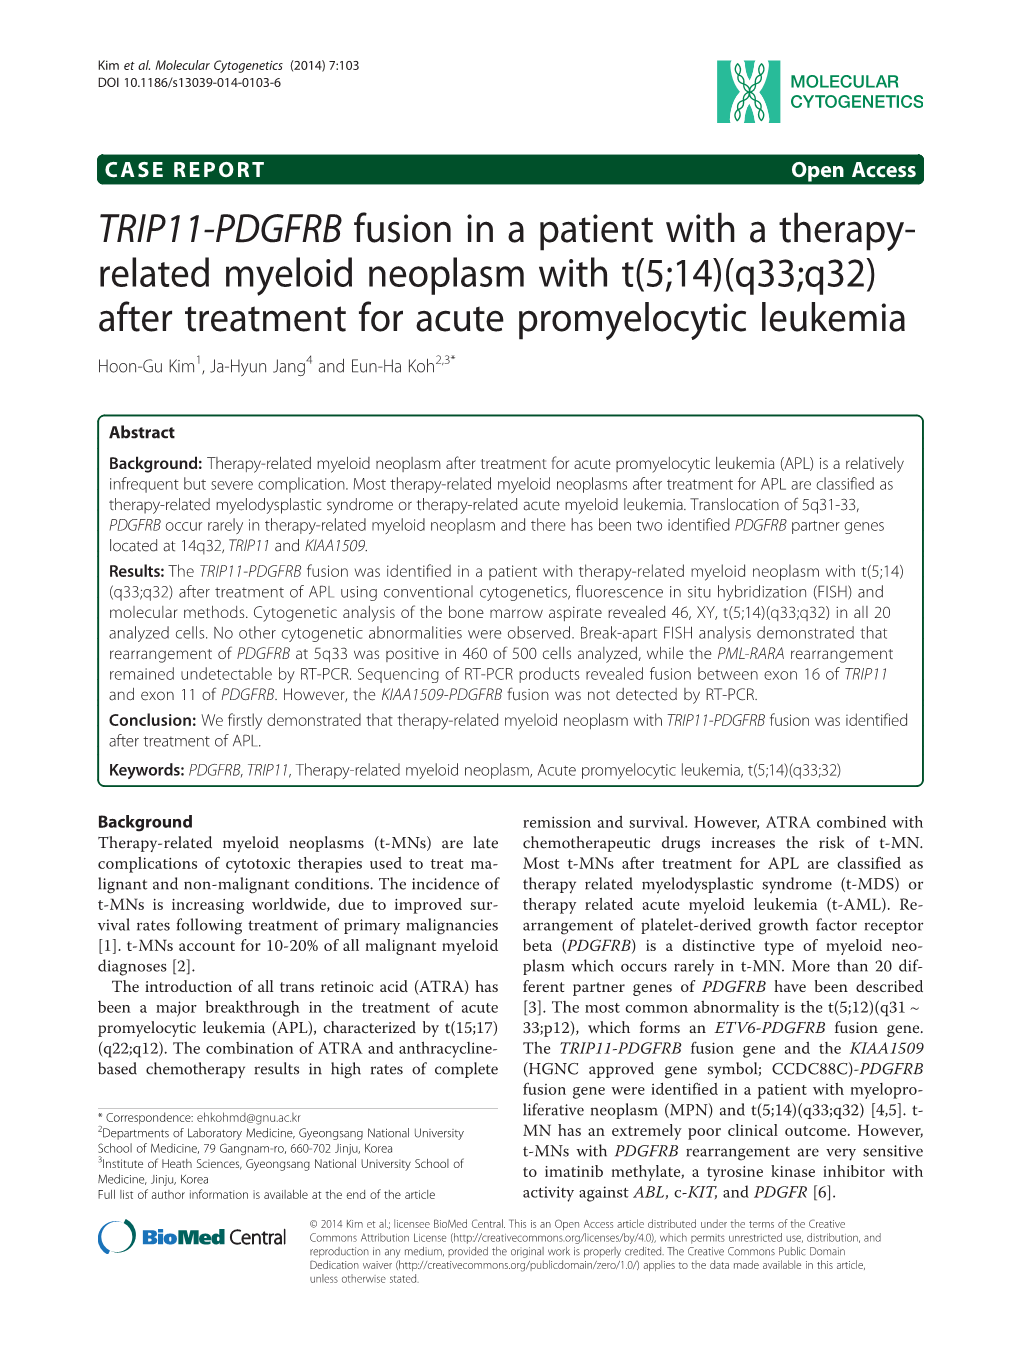 TRIP11-PDGFRB Fusion in a Patient with a Therapy- Related Myeloid